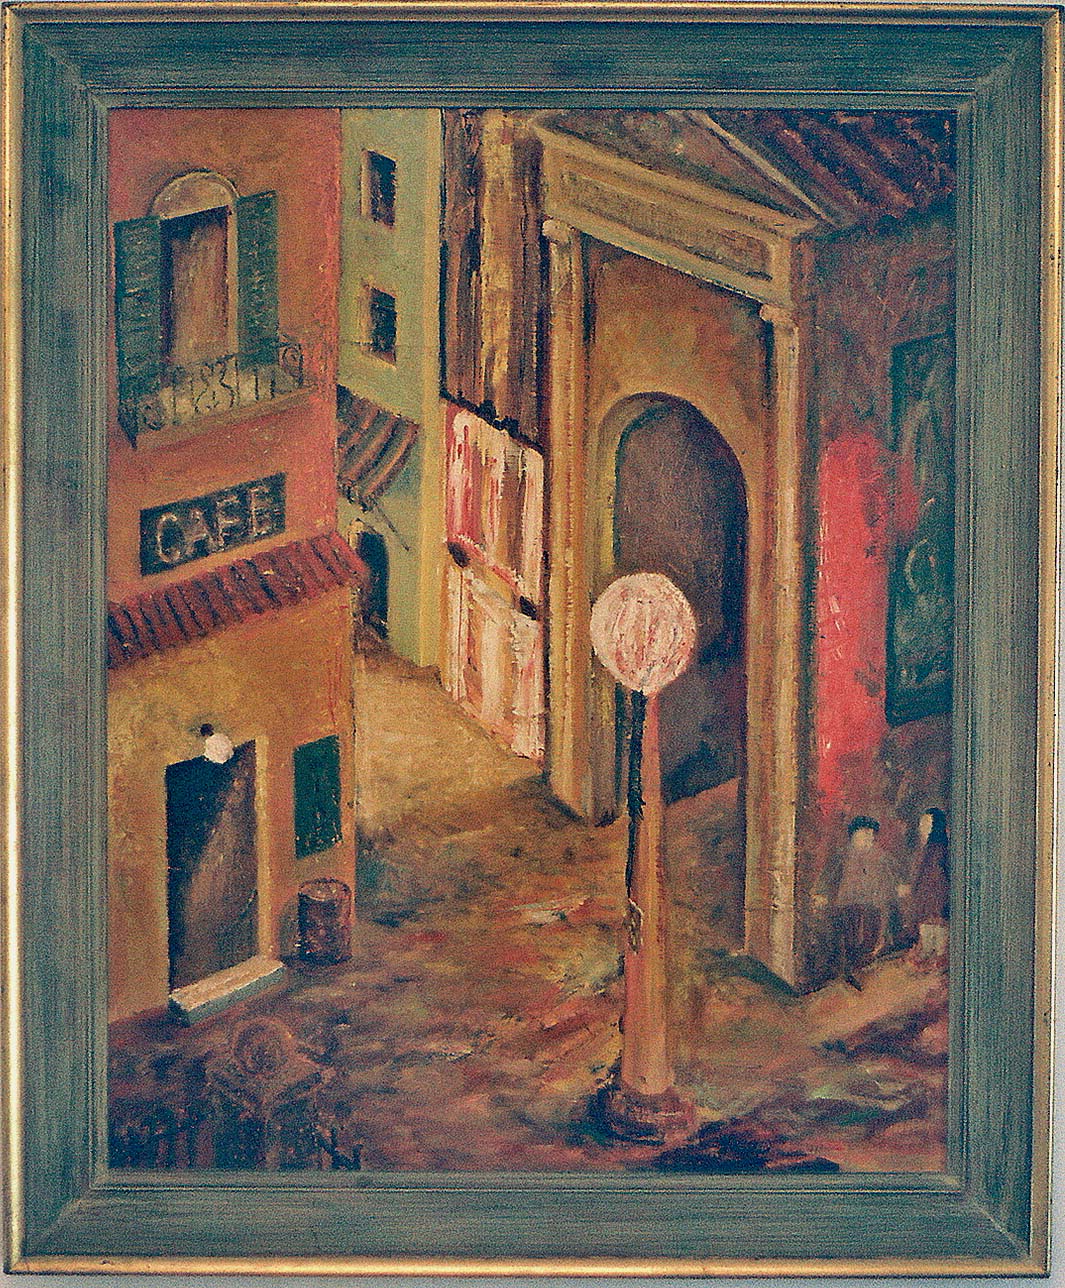 Painting by my grandfather